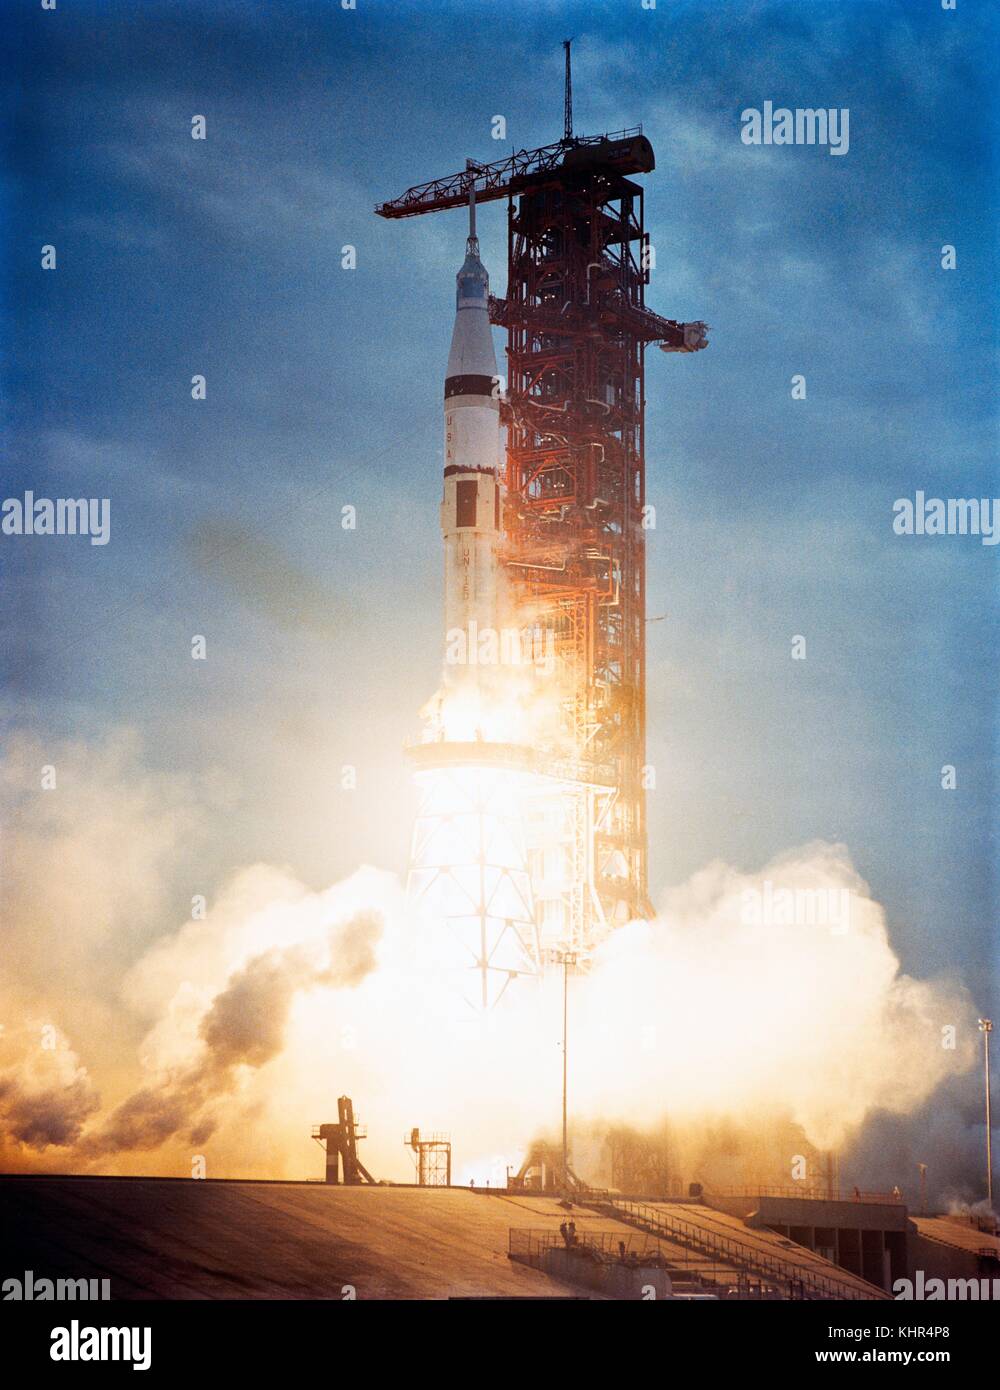 The NASA Saturn IB rocket launches from the Kennedy Space Center Launch Complex 39B for the Skylab 3 mission to the Skylab space station July 28, 1973 in Merritt Island, Florida.  (photo by NASA Photo via Planetpix) Stock Photo